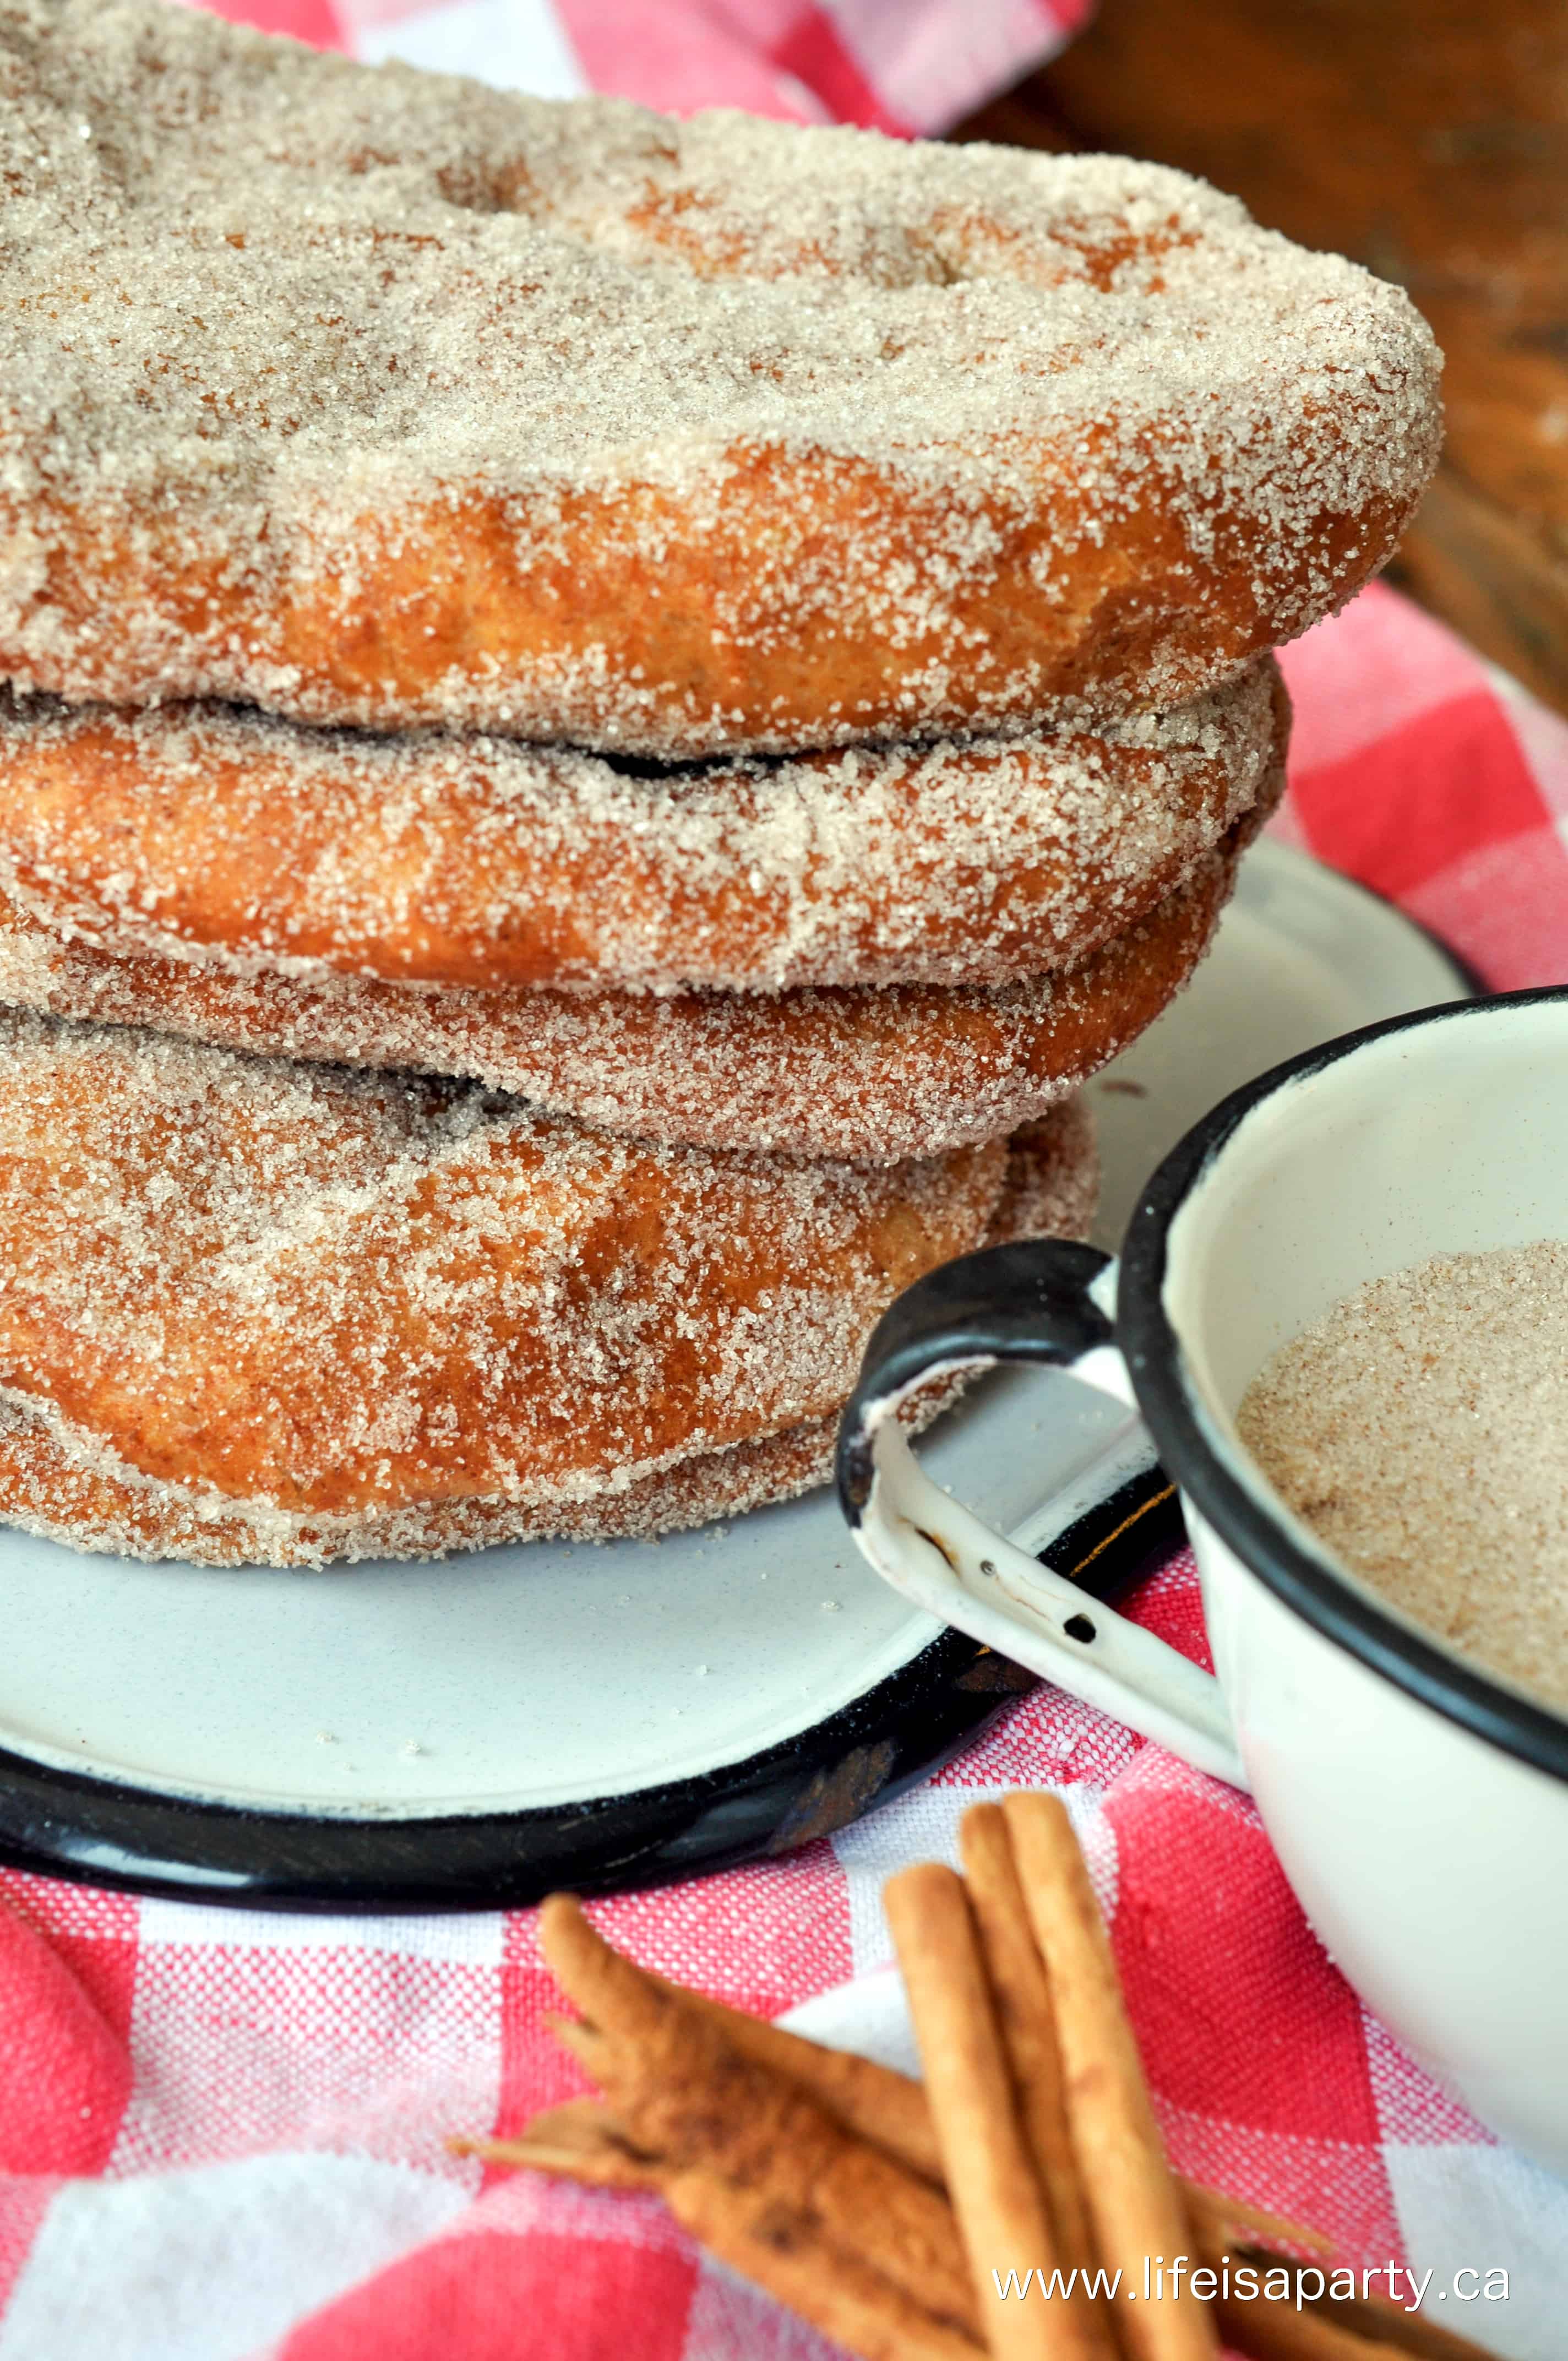 Canadian Fried Dough: Beaver Tails are a Canadian classic, enjoy these delicious donut like pastries with cinnamon sugar sprinkled on top.